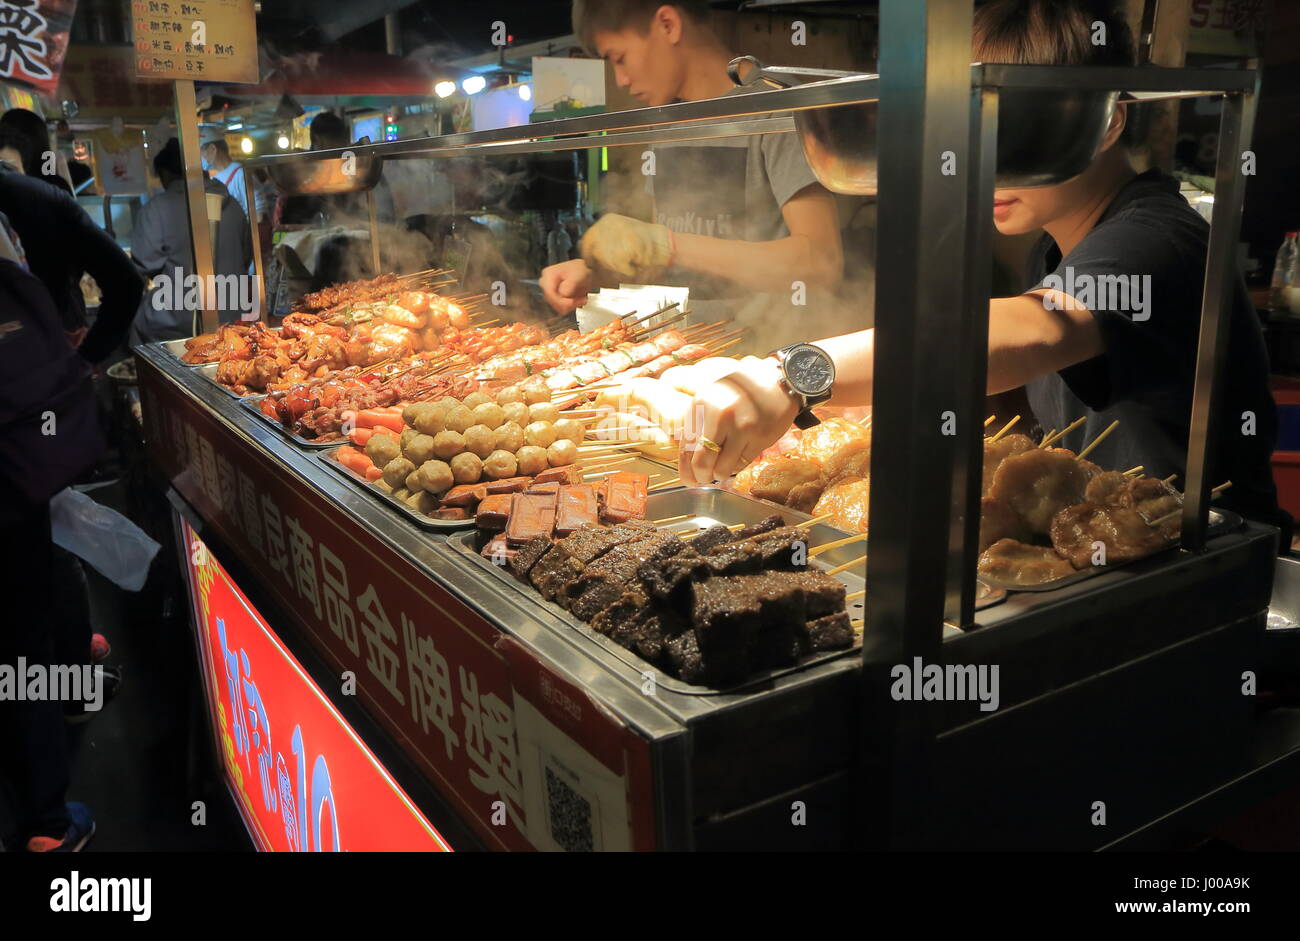 People cook traditional Taiwanese food at Raohe Night market in Taipei Taiwan. Raohe Night market is one of the oldest night markets in Taipei. Stock Photo